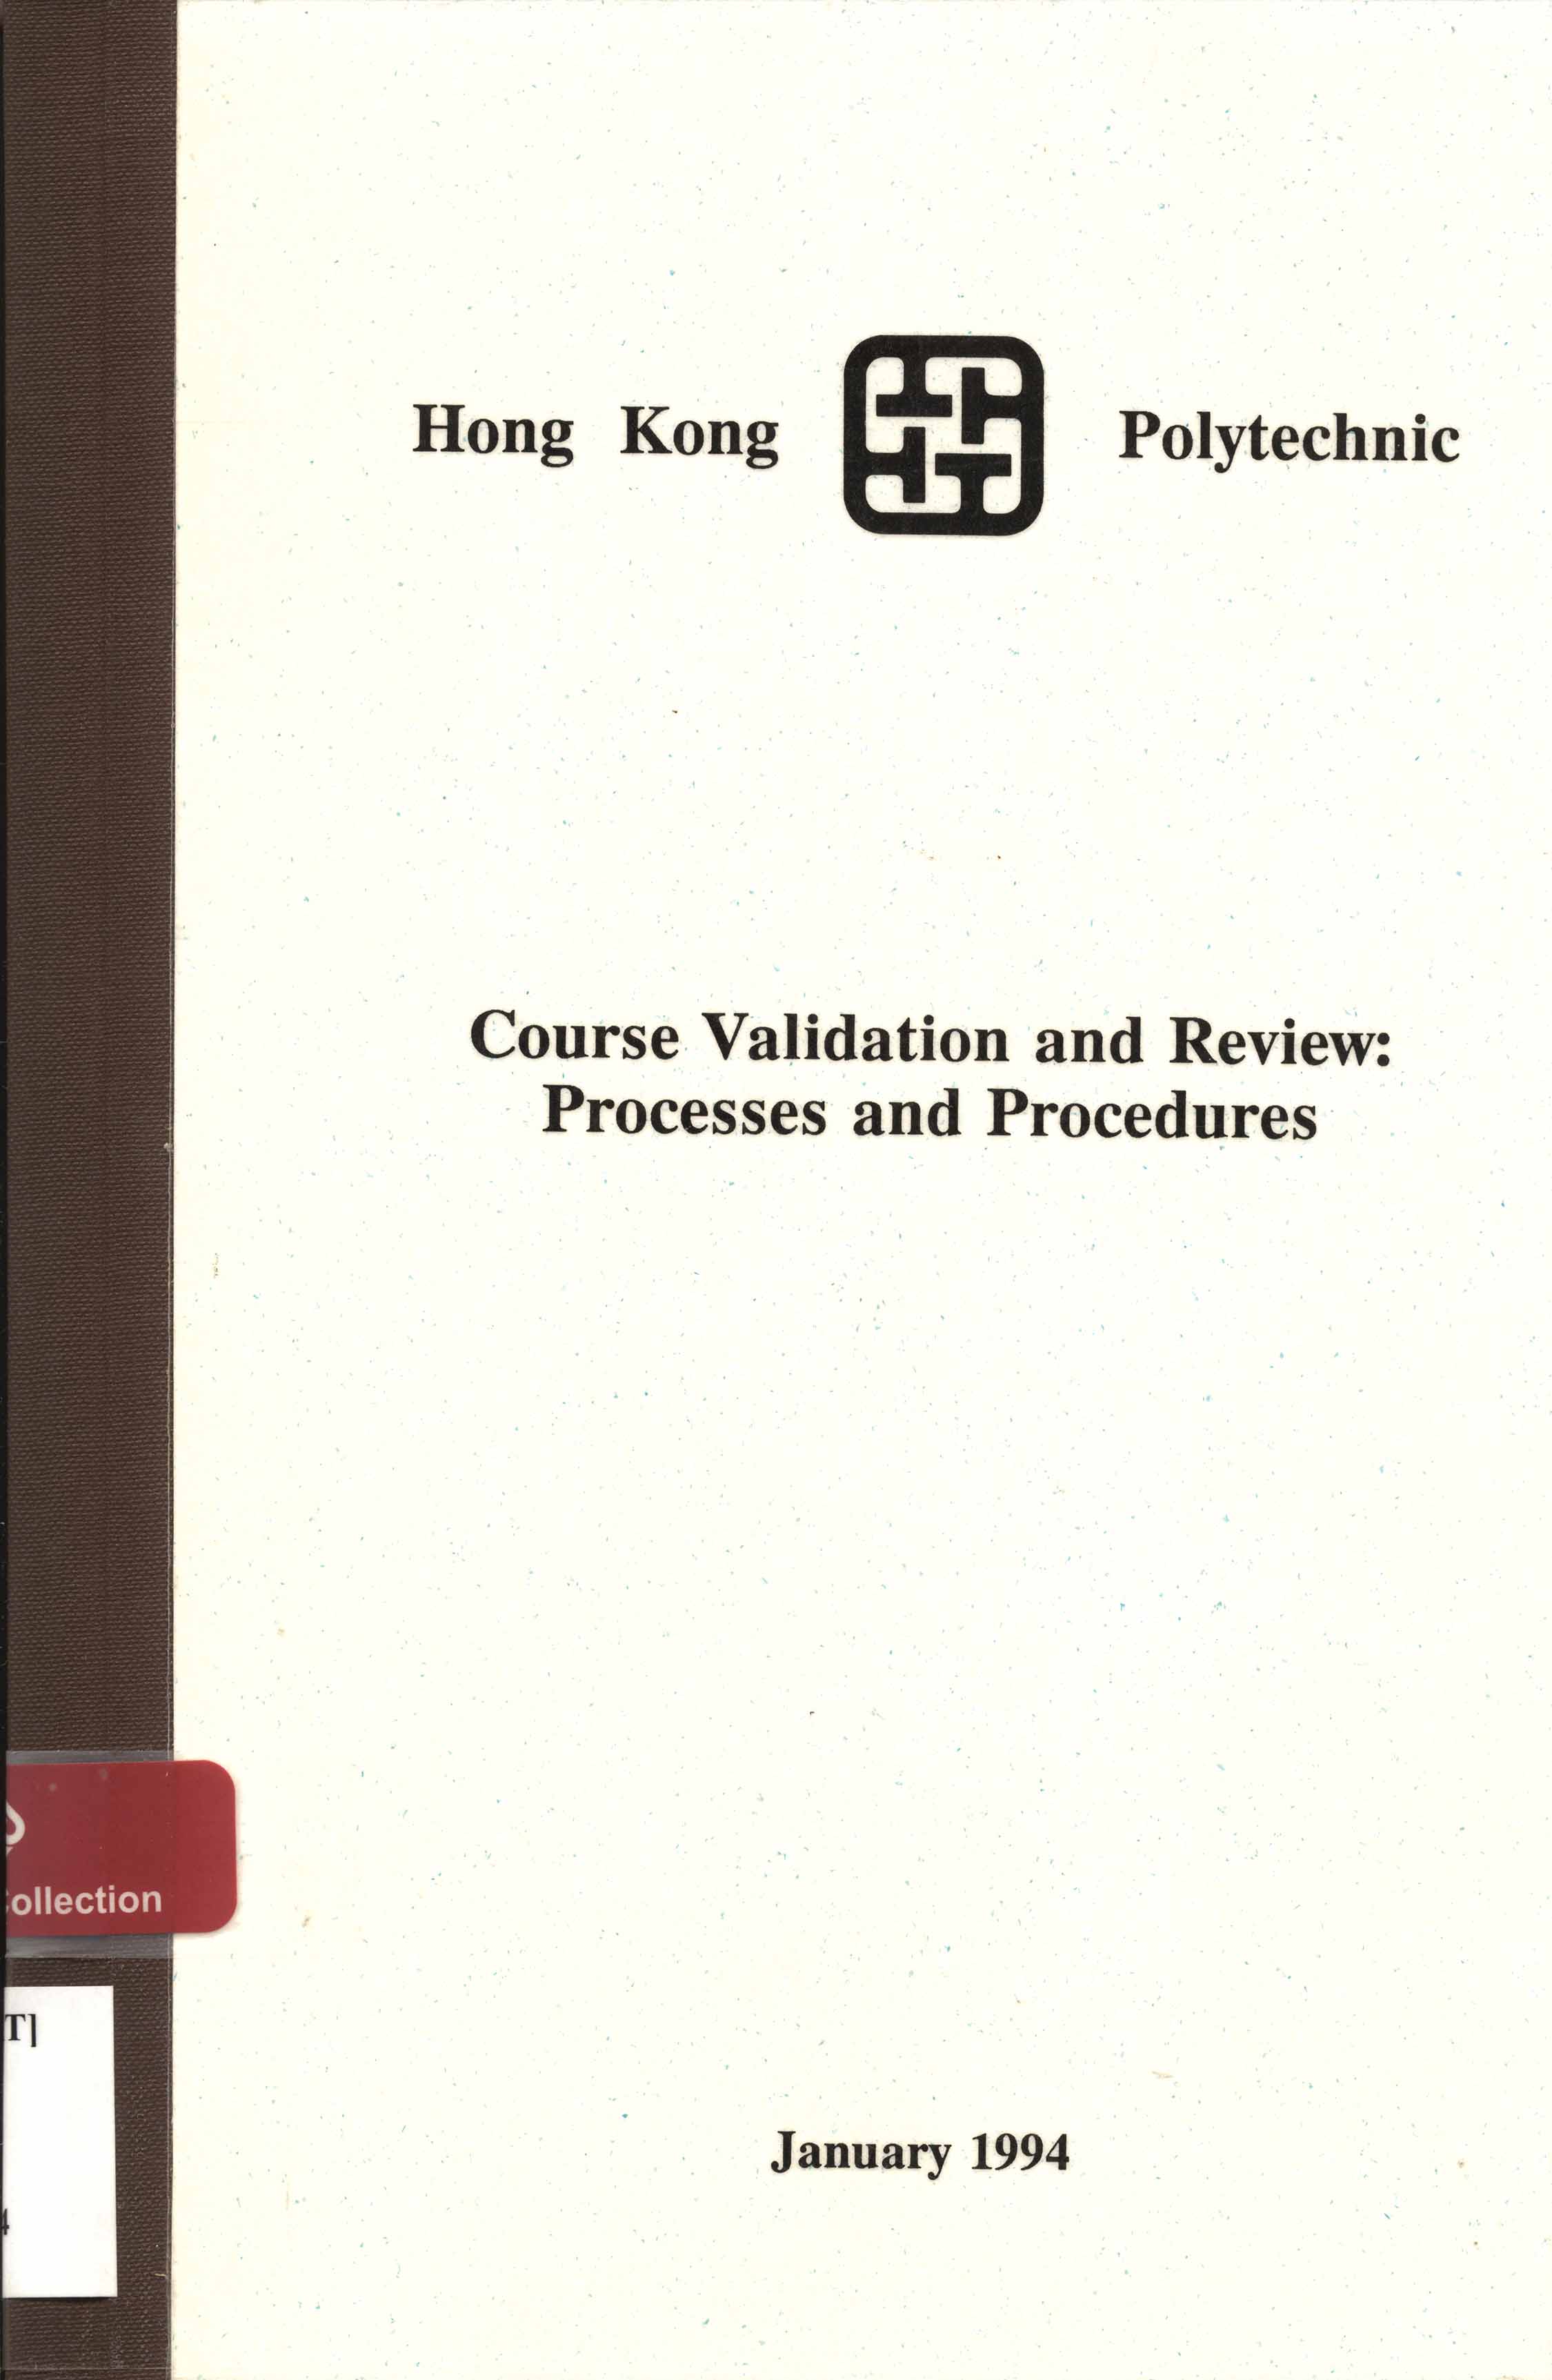 Hong Kong Polytechnic course validation and review : processes and procedures